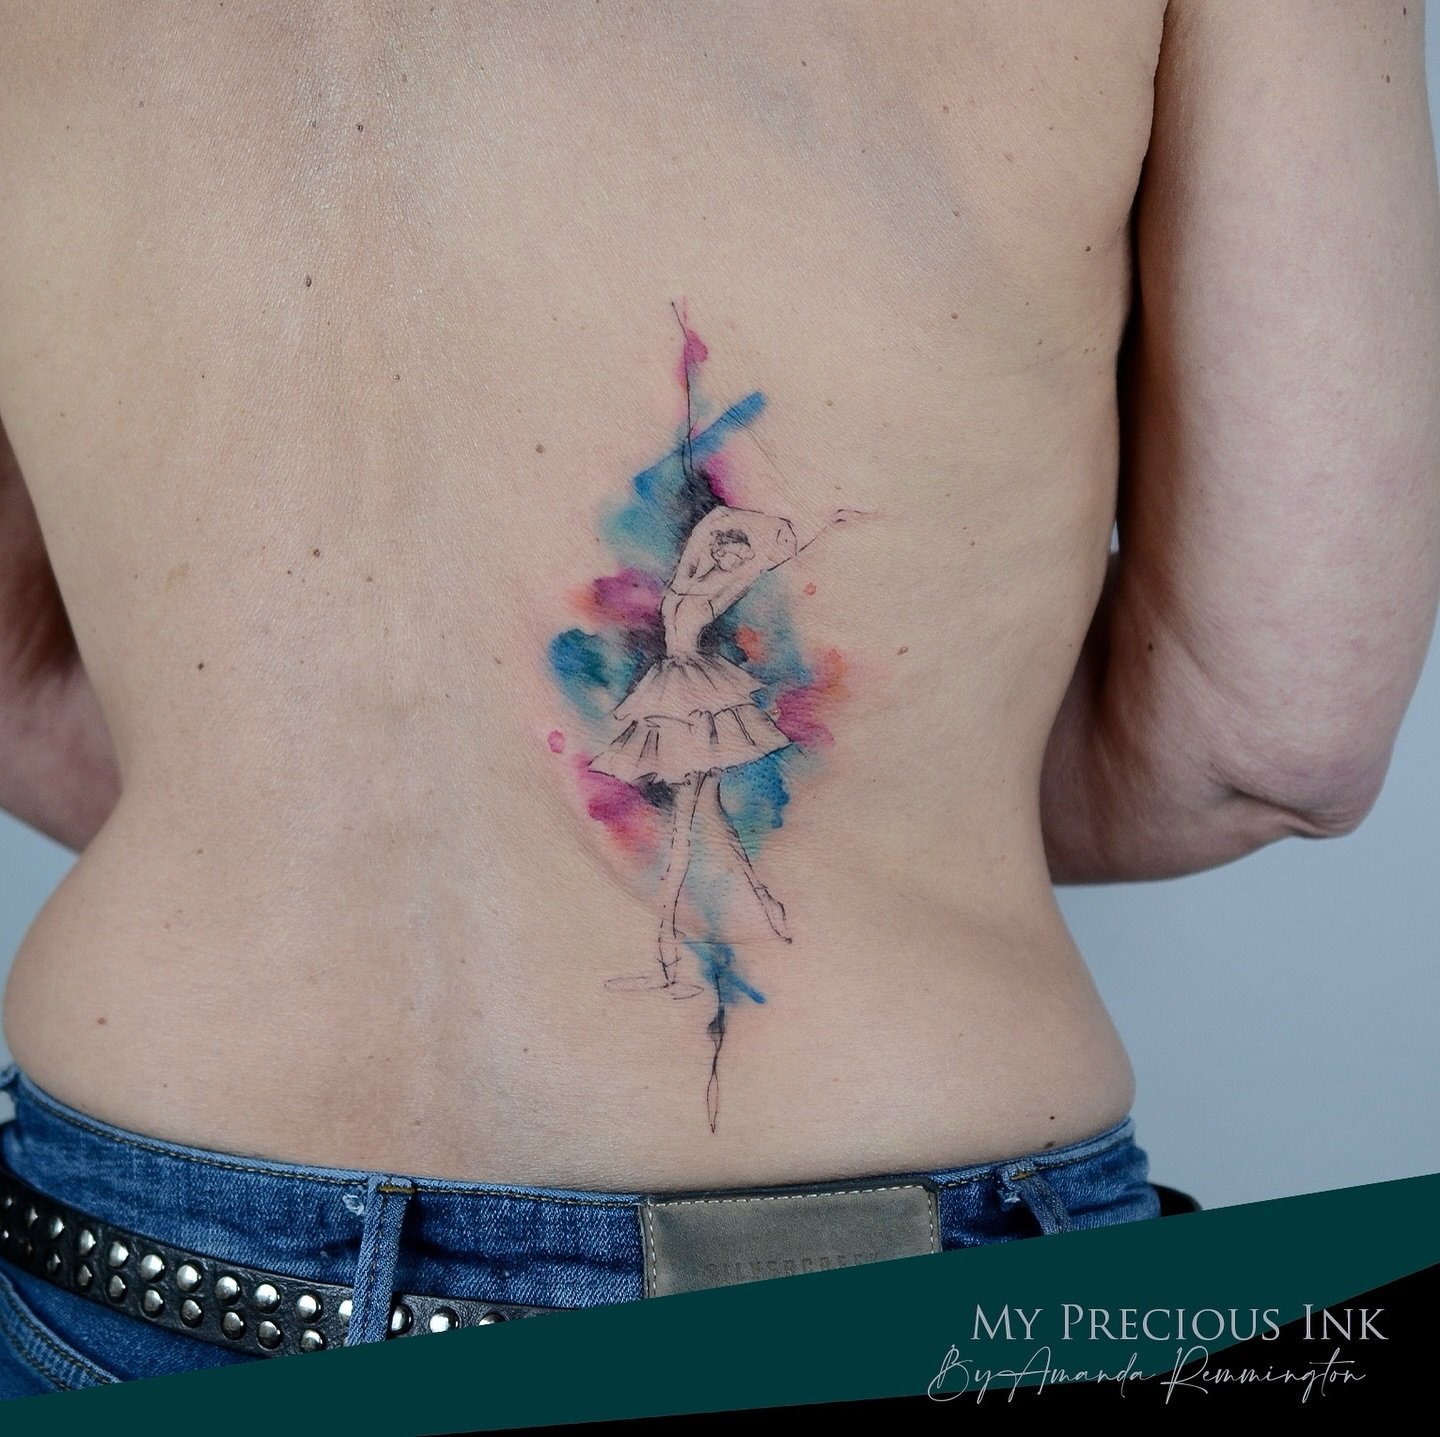 Abstract dancer with watercolours 🎨

#tattoolifecommunity #watercolortattoos  #watercolortattoostyle #watercolortattooartist #abstracttattoo #tattoostagrams #dutchtattooartist #colortattooartist  #abstracttattooart #abstracttattoos #colorfulltattoo 